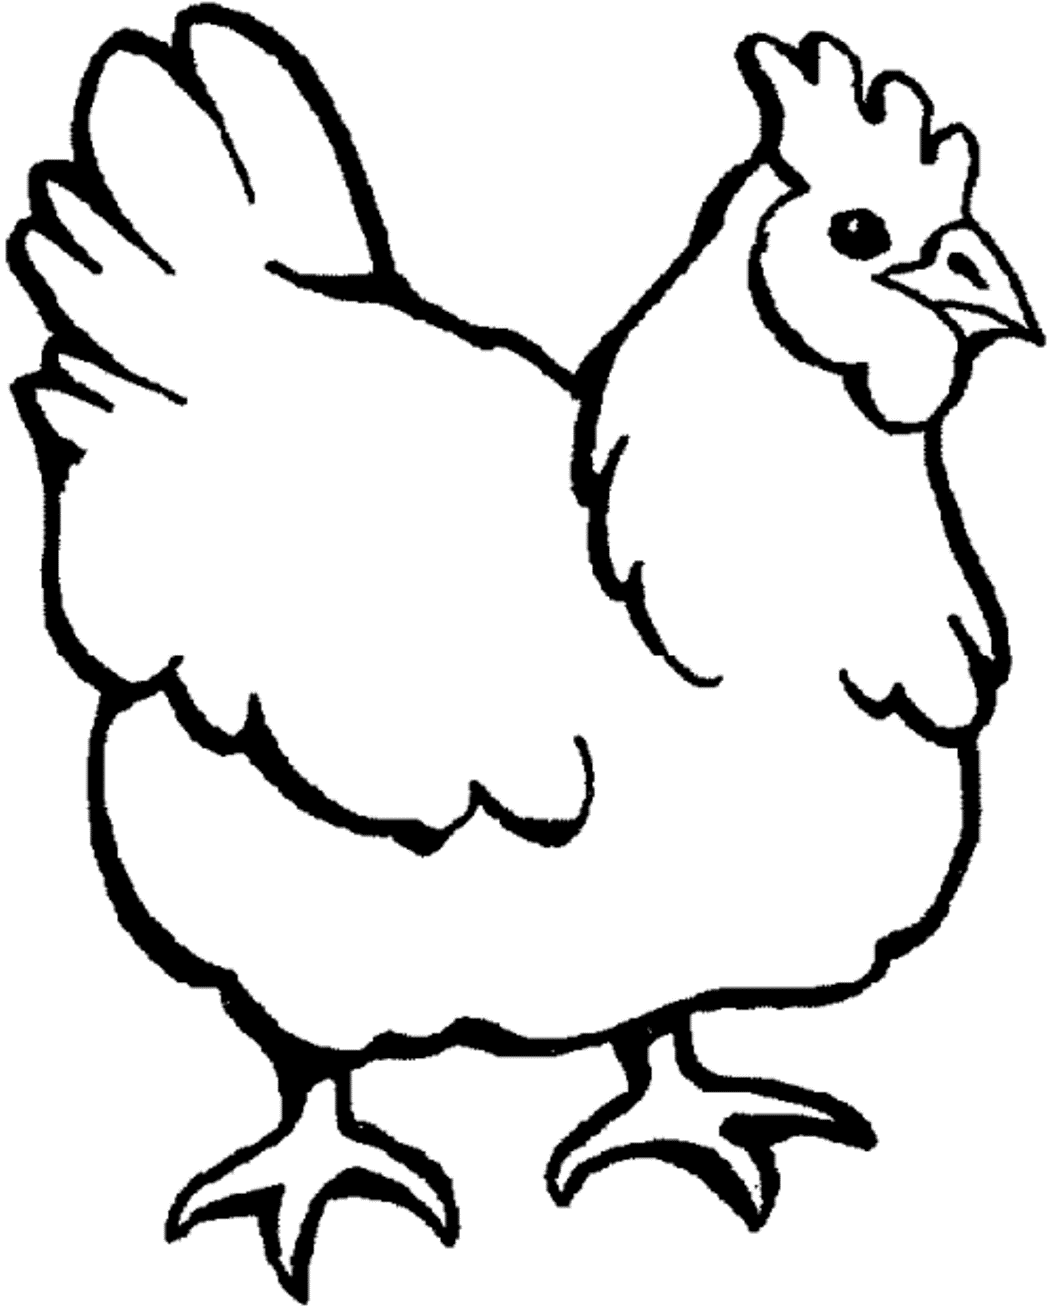 Images For > Hen Clip Art Black And White